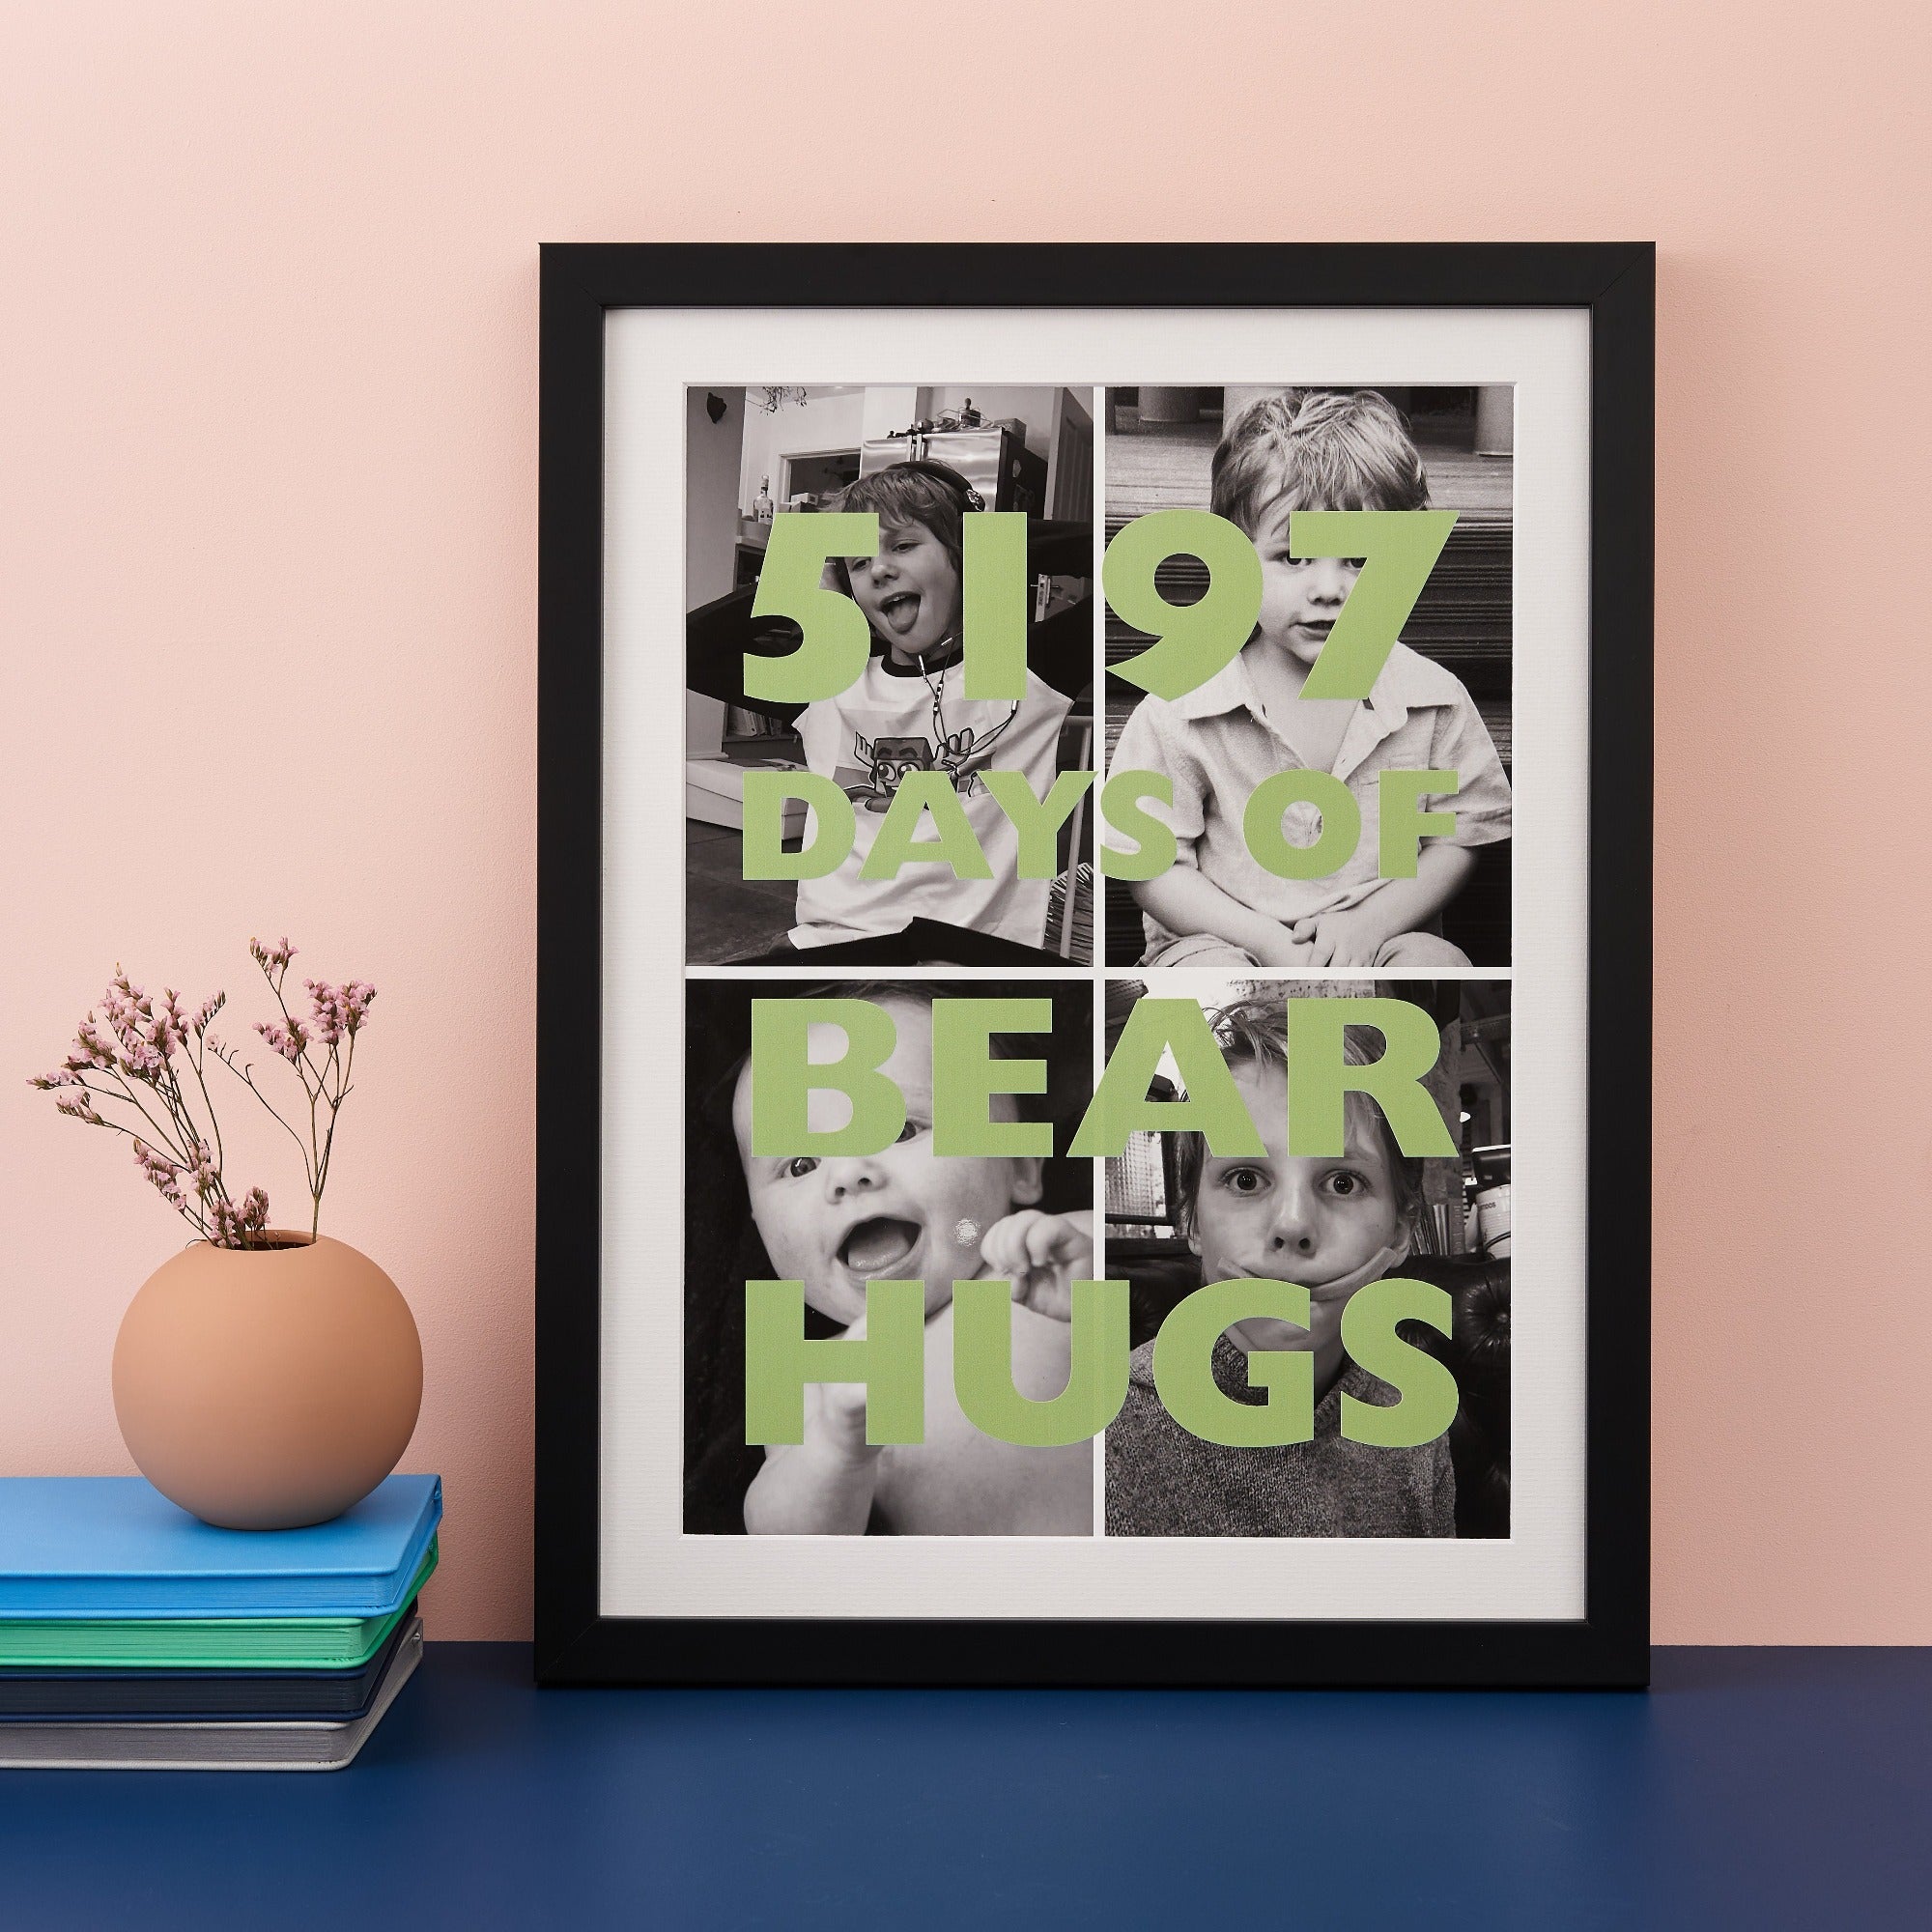 Print with small black and white photos in a grid overlayed with large personalised text in green 